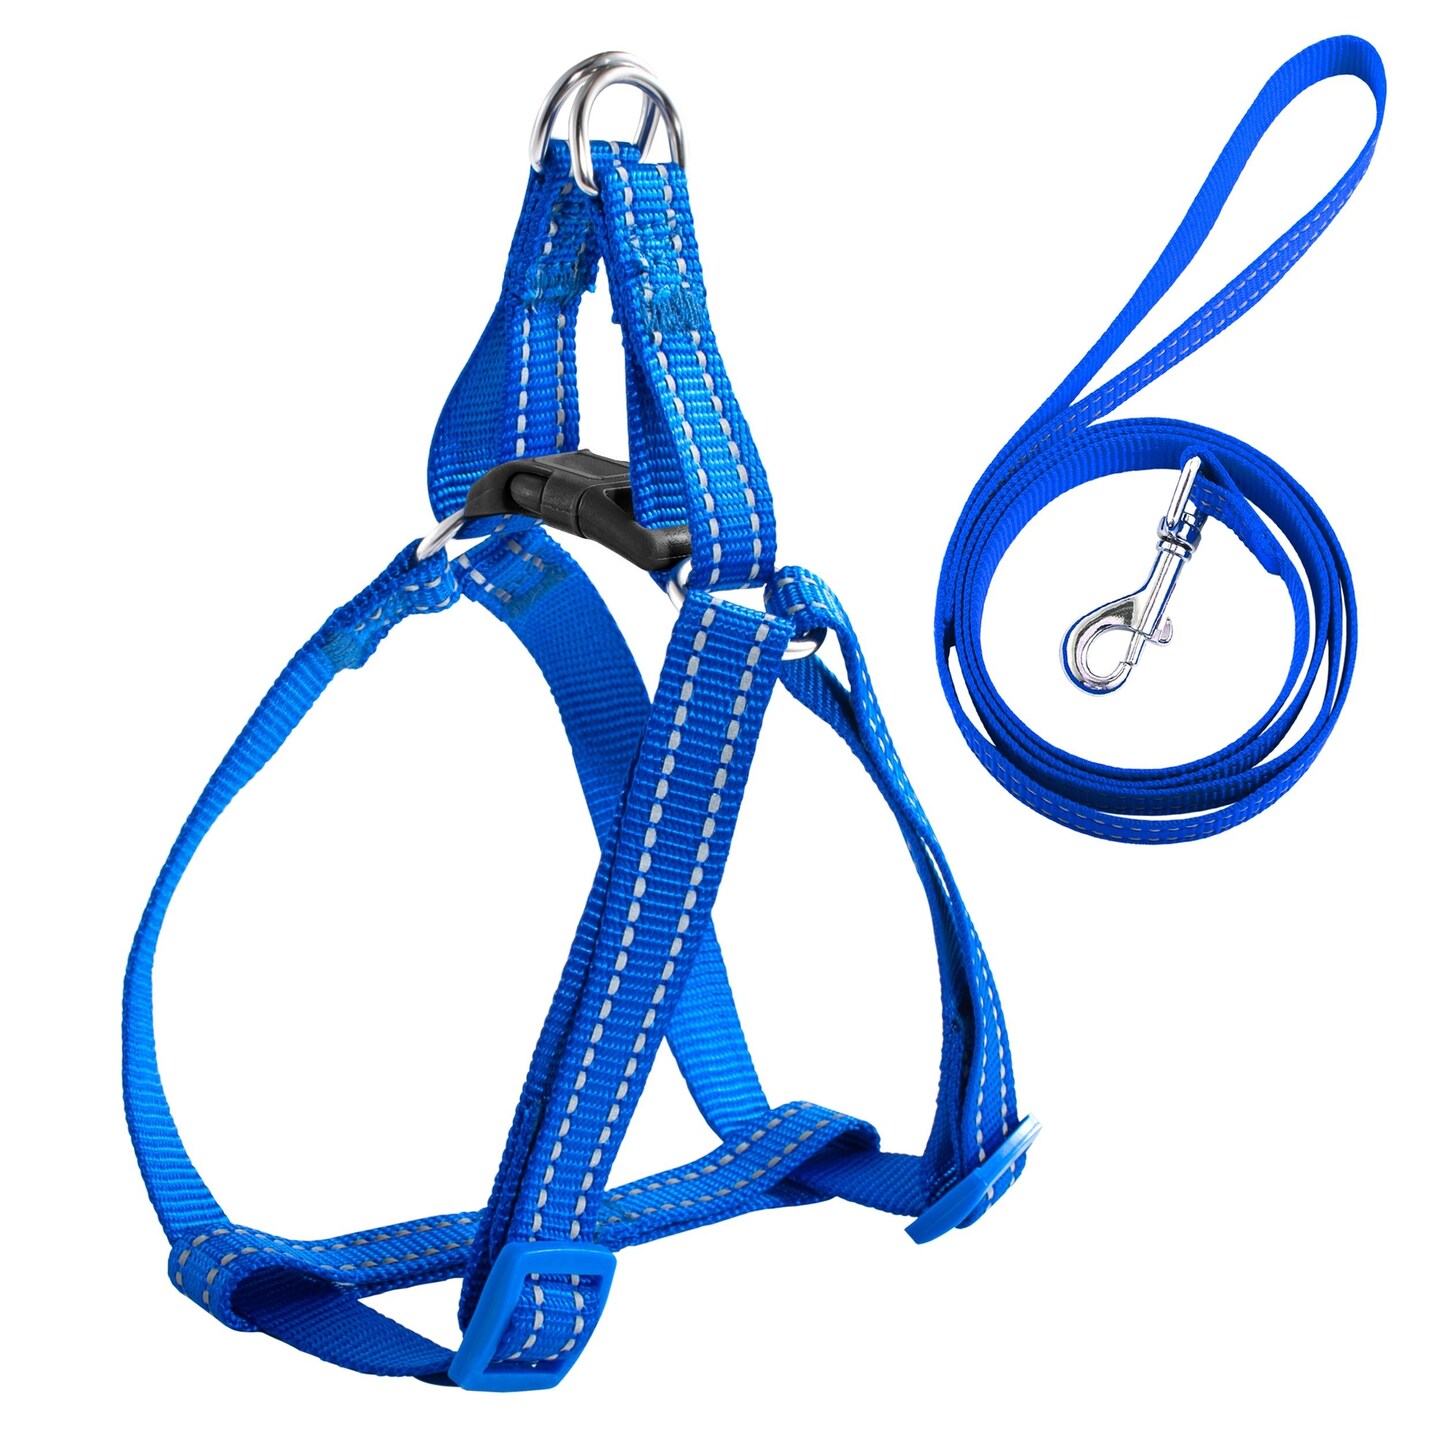 No Pull Nylon Harness and Leash Set Reflective Adjustable for Dogs Cats Pets Walking, Blue, Extra Large Size XL